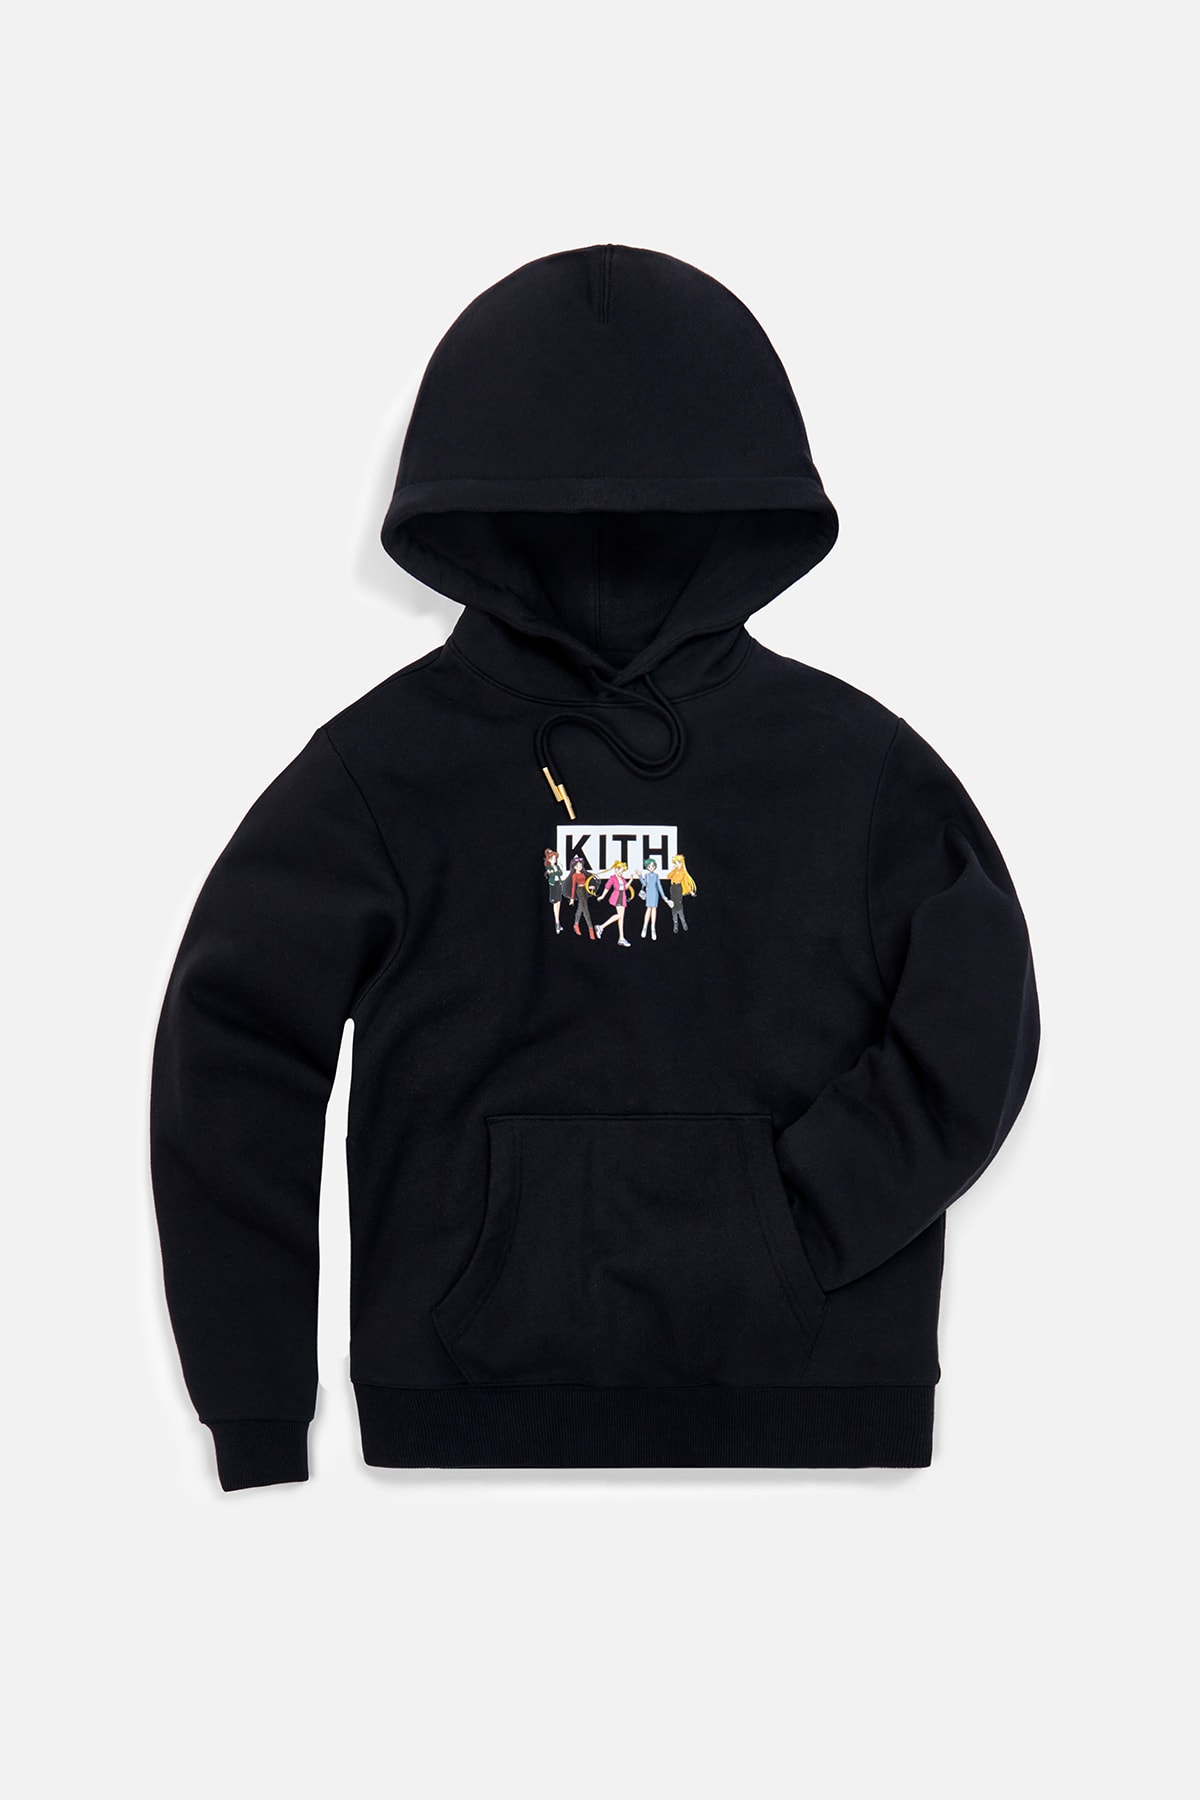 Sailor Moon x KITH Women Collaboration Collection Hoodie Black